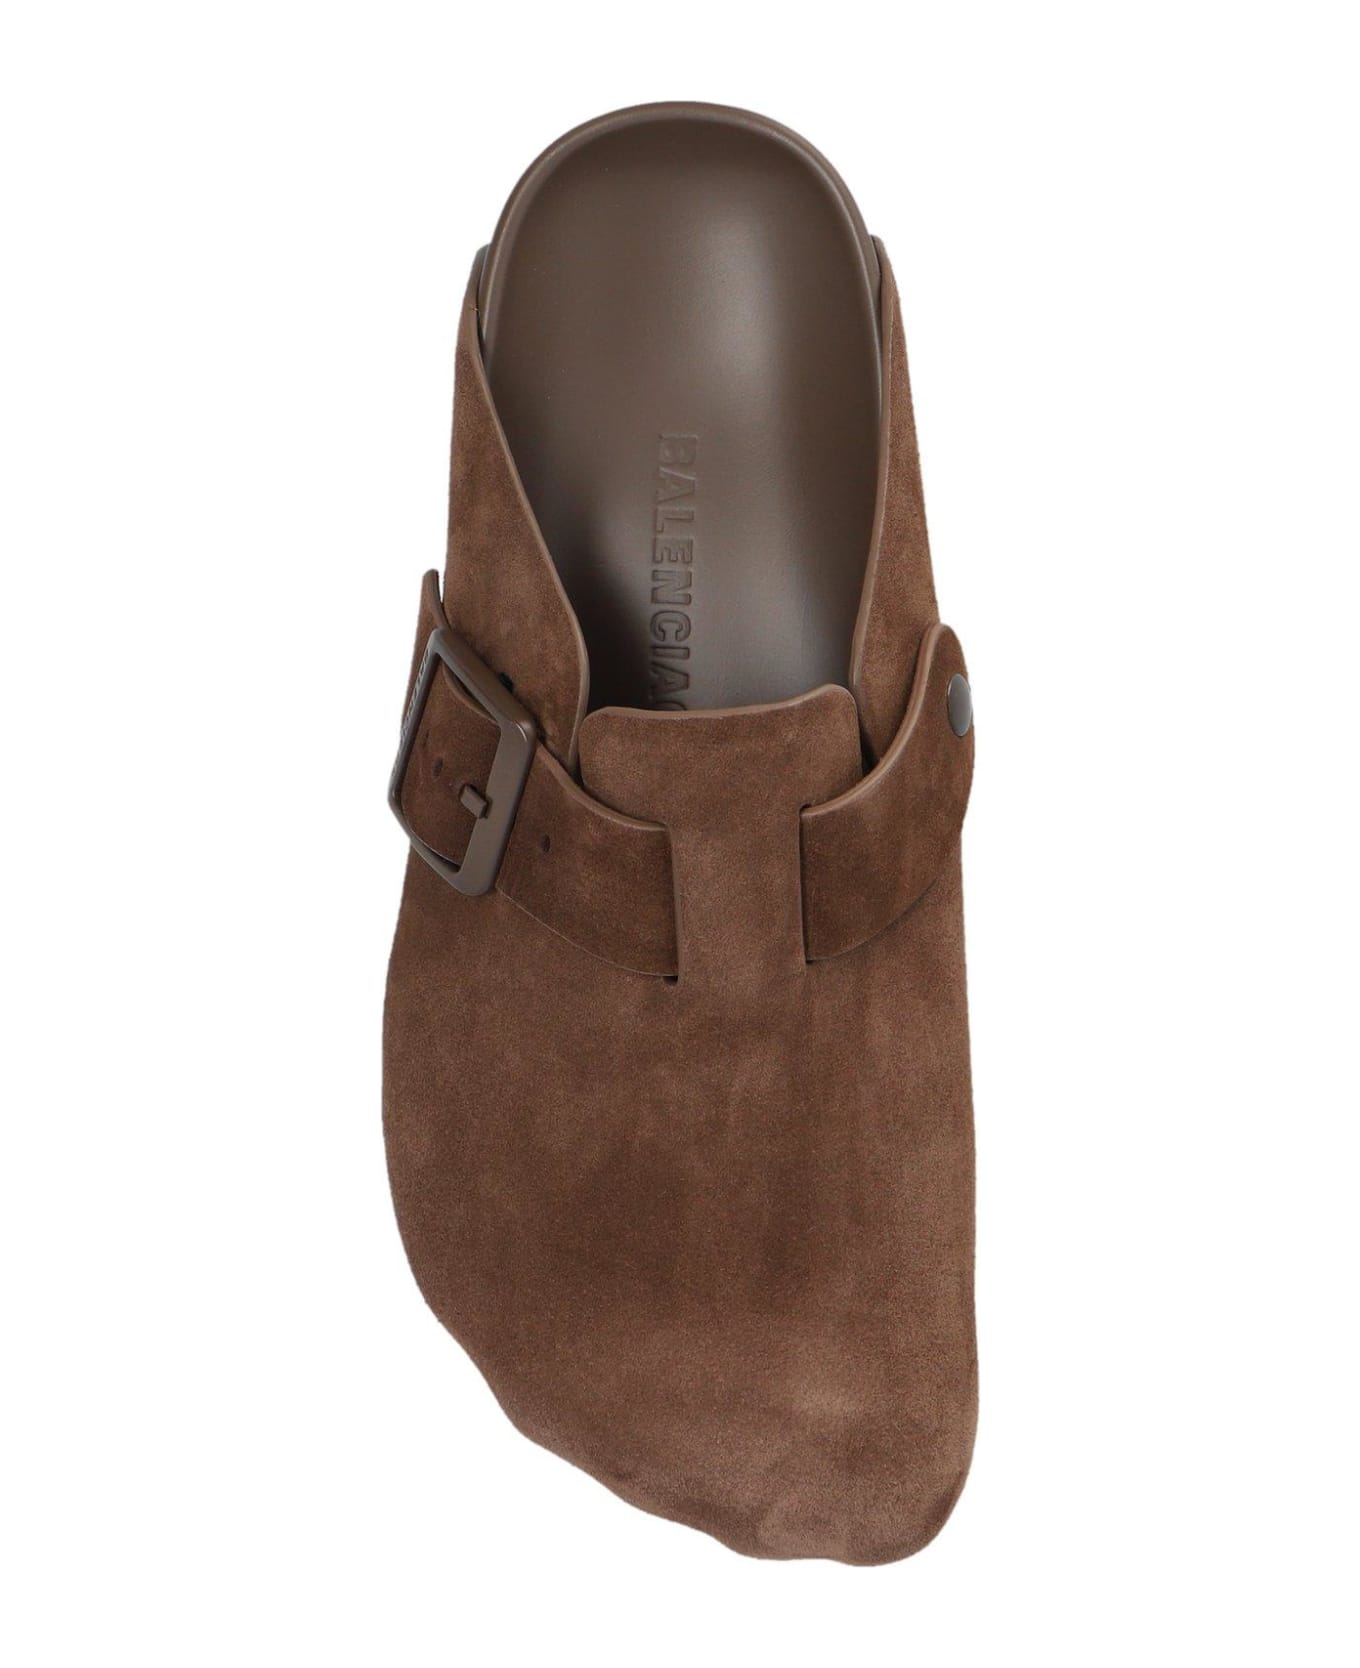 Balenciaga Sunday Buckled Mules - Cold Brown その他各種シューズ